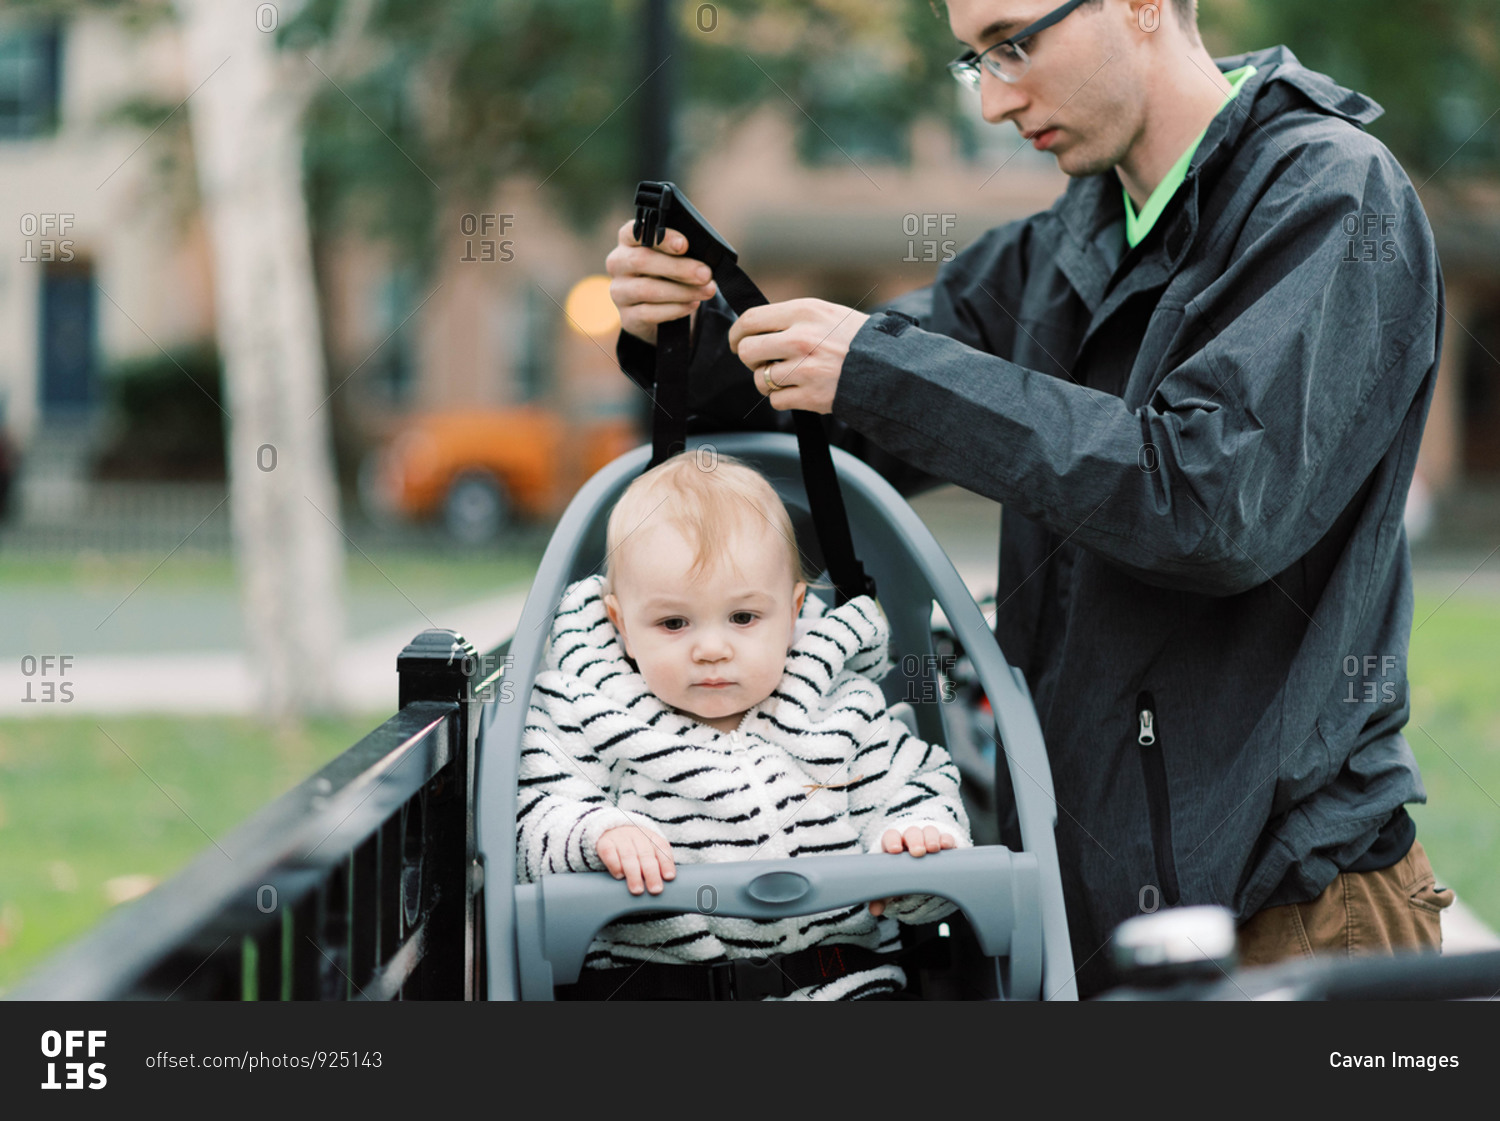 A young millennial dad strapping his son in his bike seat.